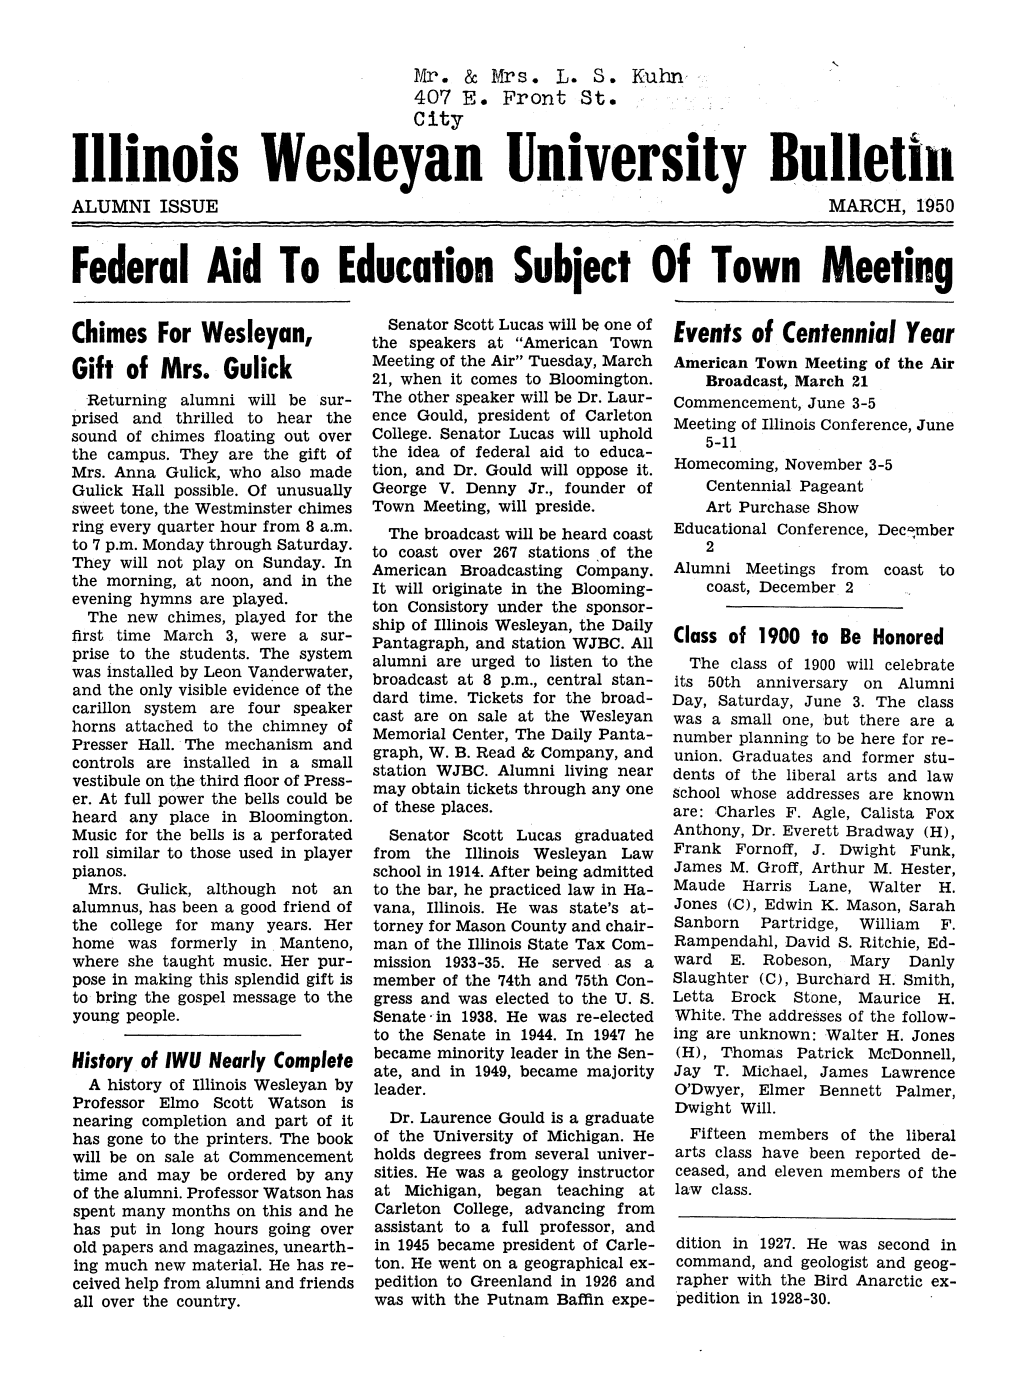 Illinois Wesleyan University Bulletin ALUMNI ISSUE MARCH, 1950 Federal Aid to Education Subject of Town Meeting